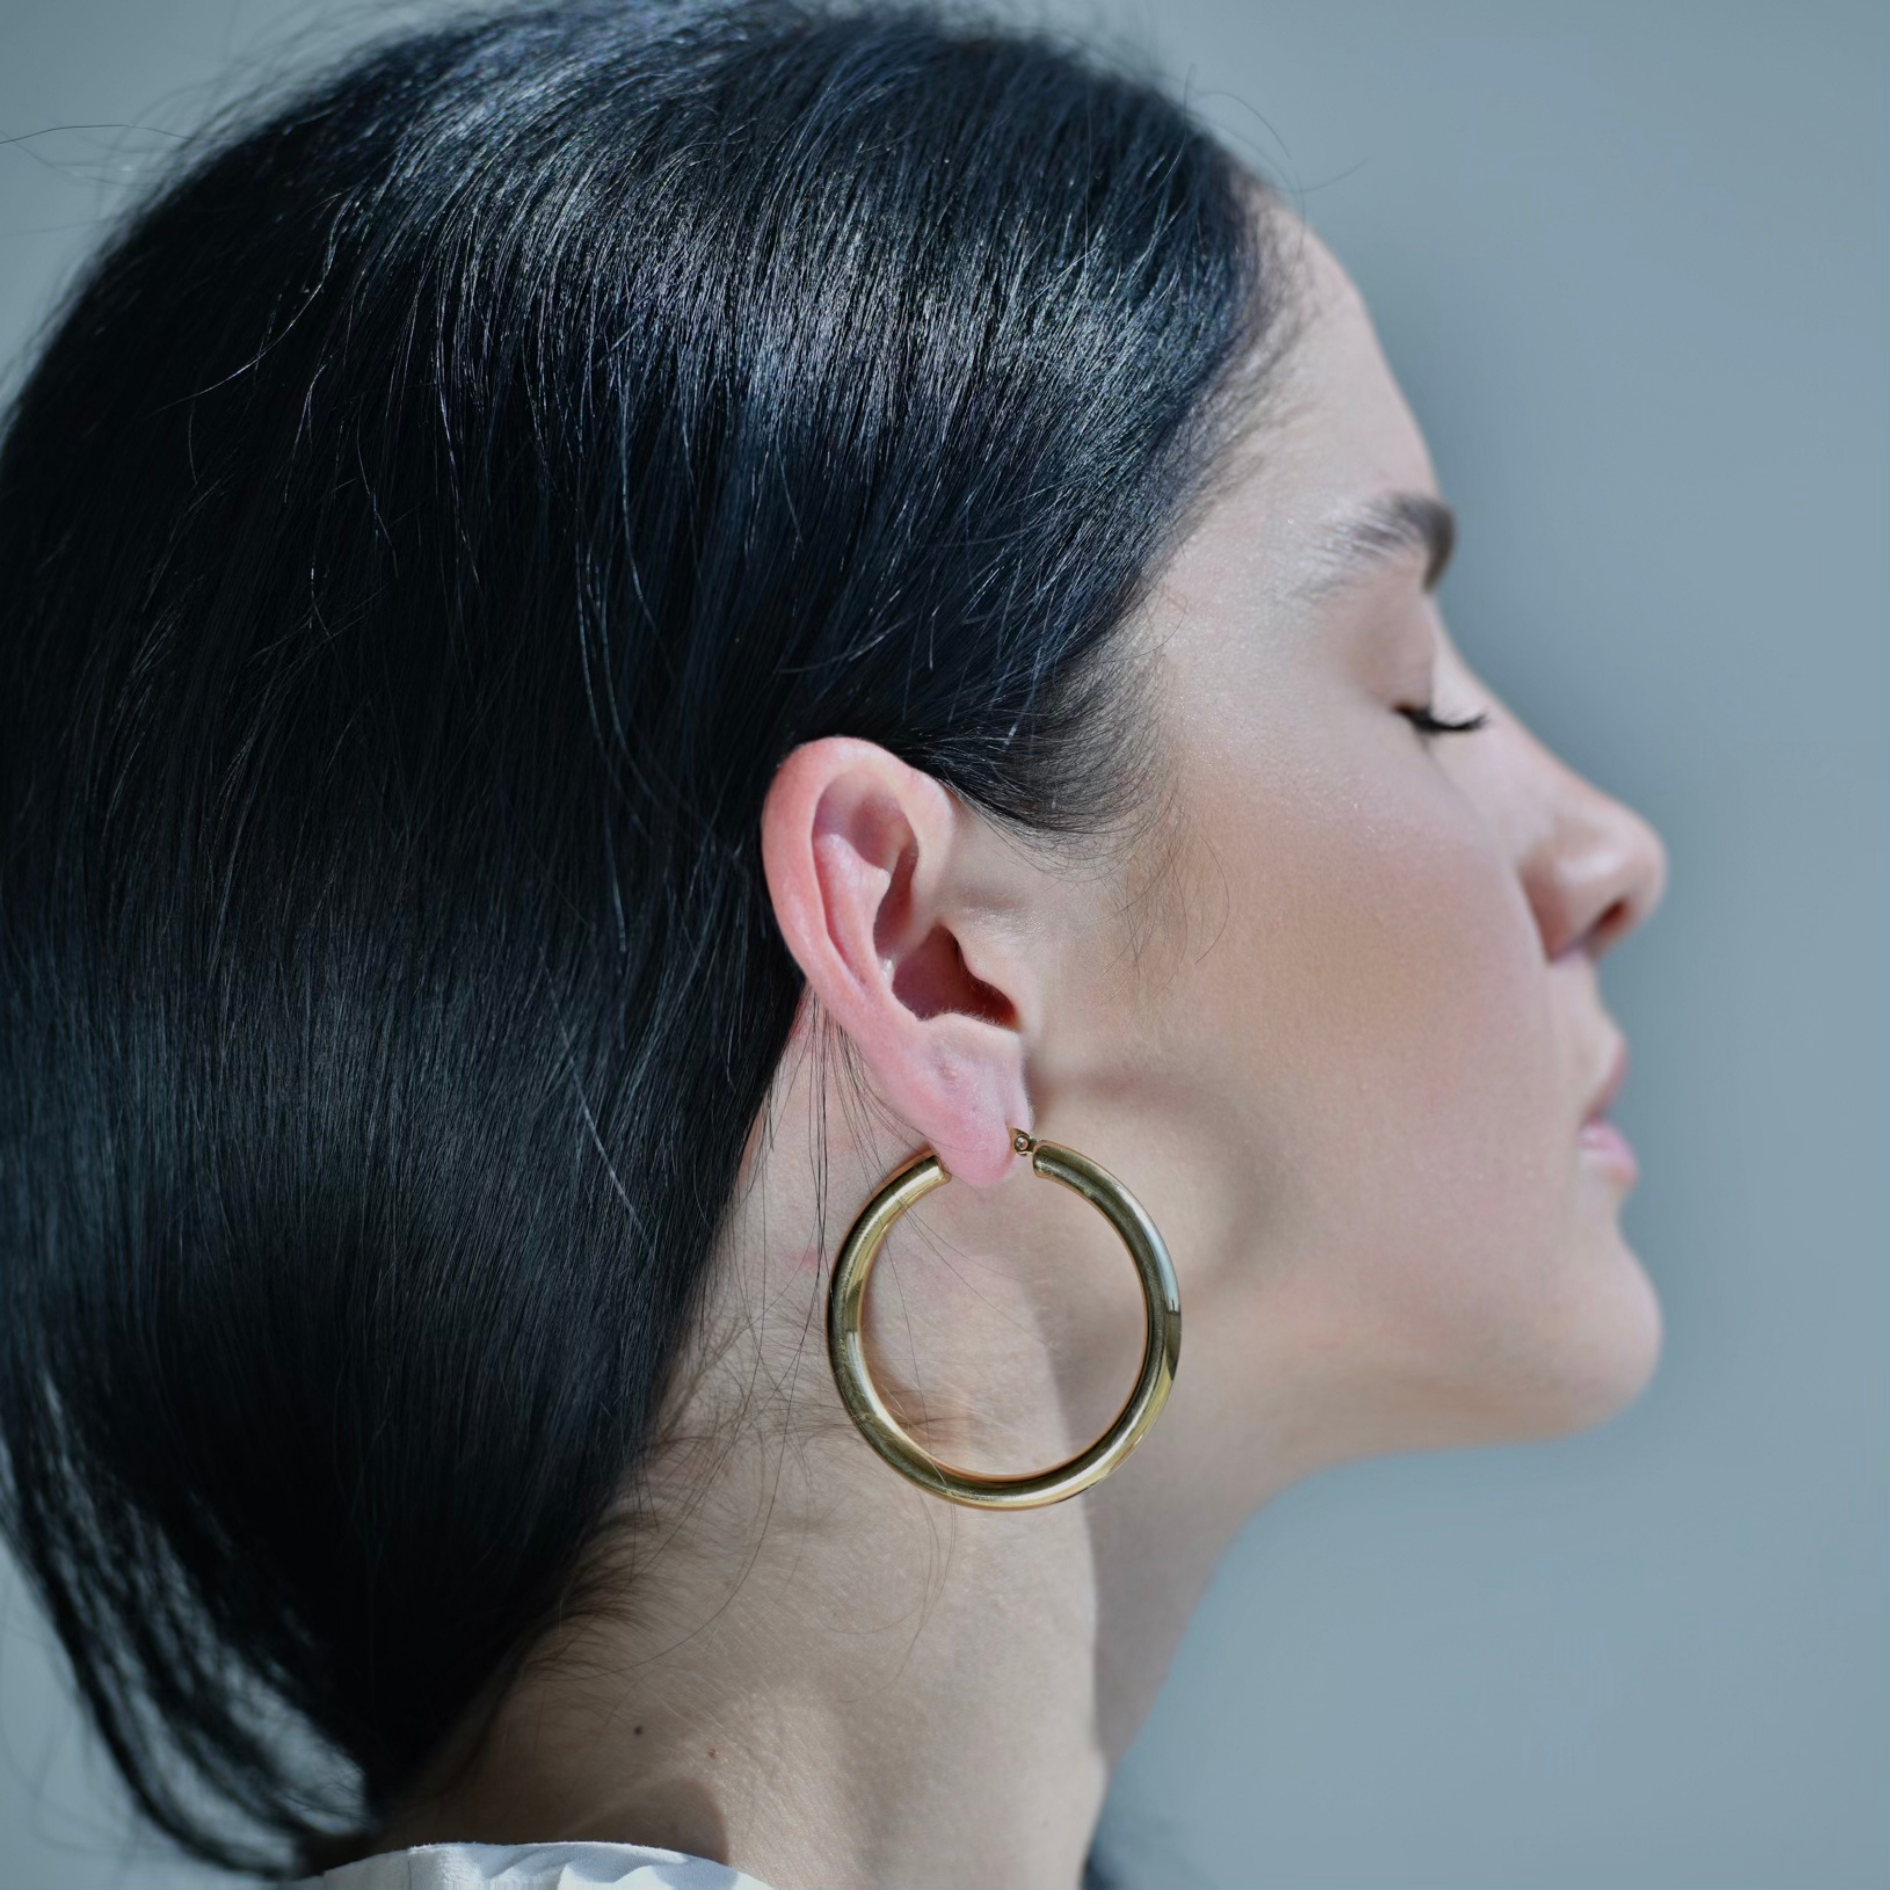 Classic Big Gold Hoops. Big Round circle Earrings plated in gold. Girl wearing the earrings